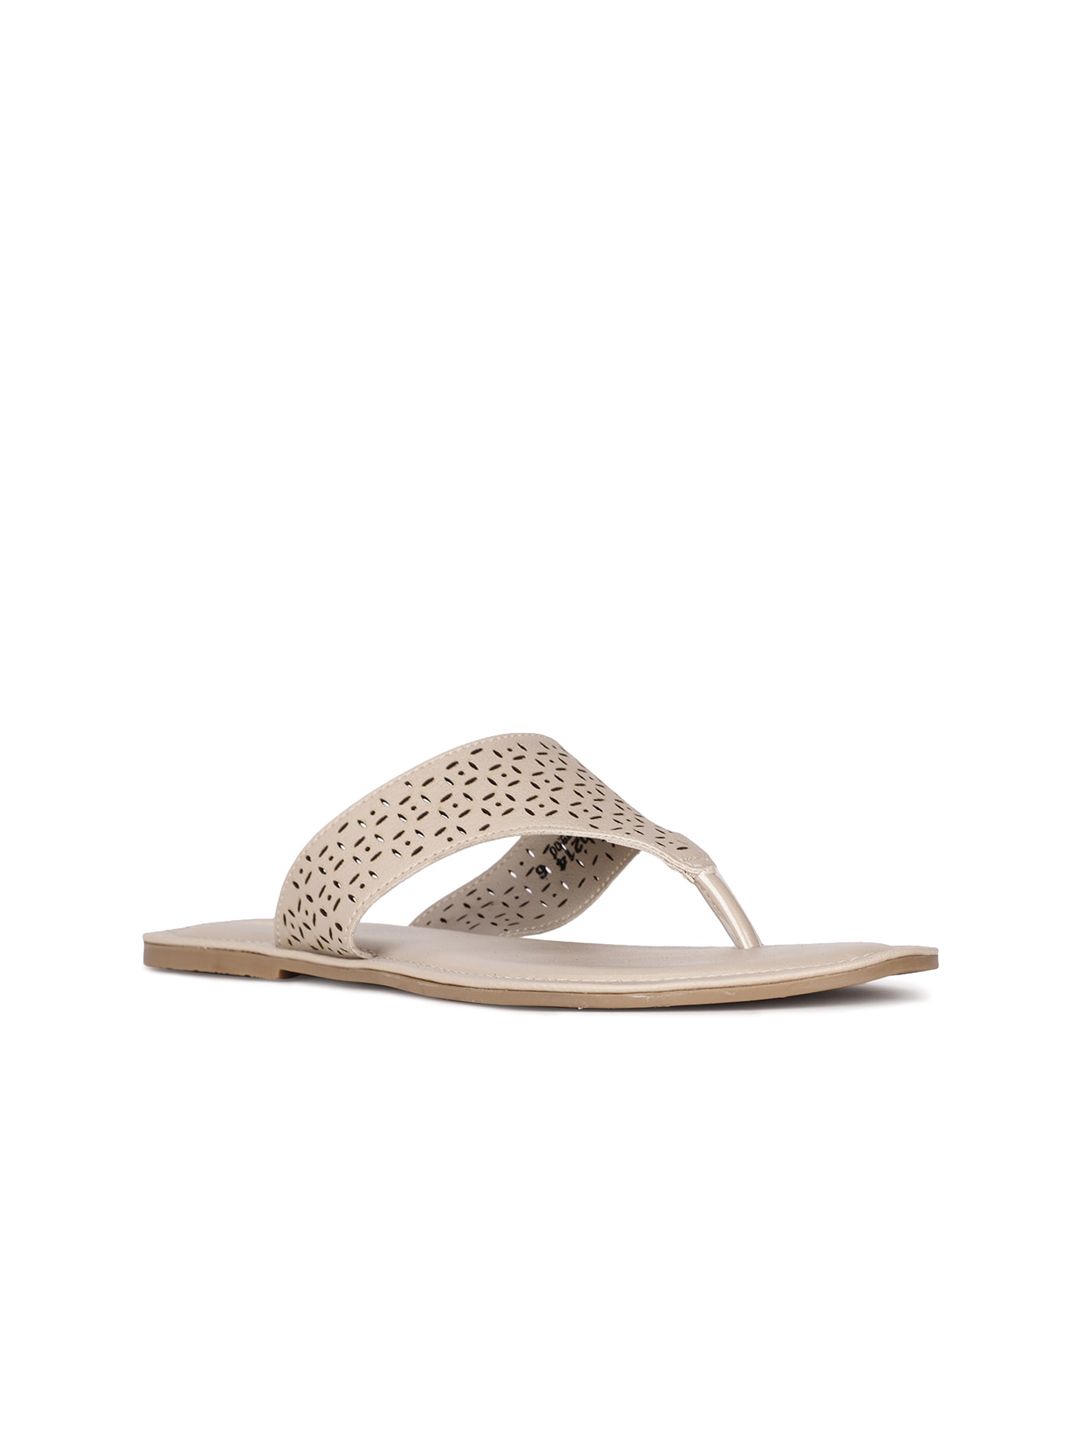 Bata Women Beige T-Strap Flats With Laser Cuts Price in India